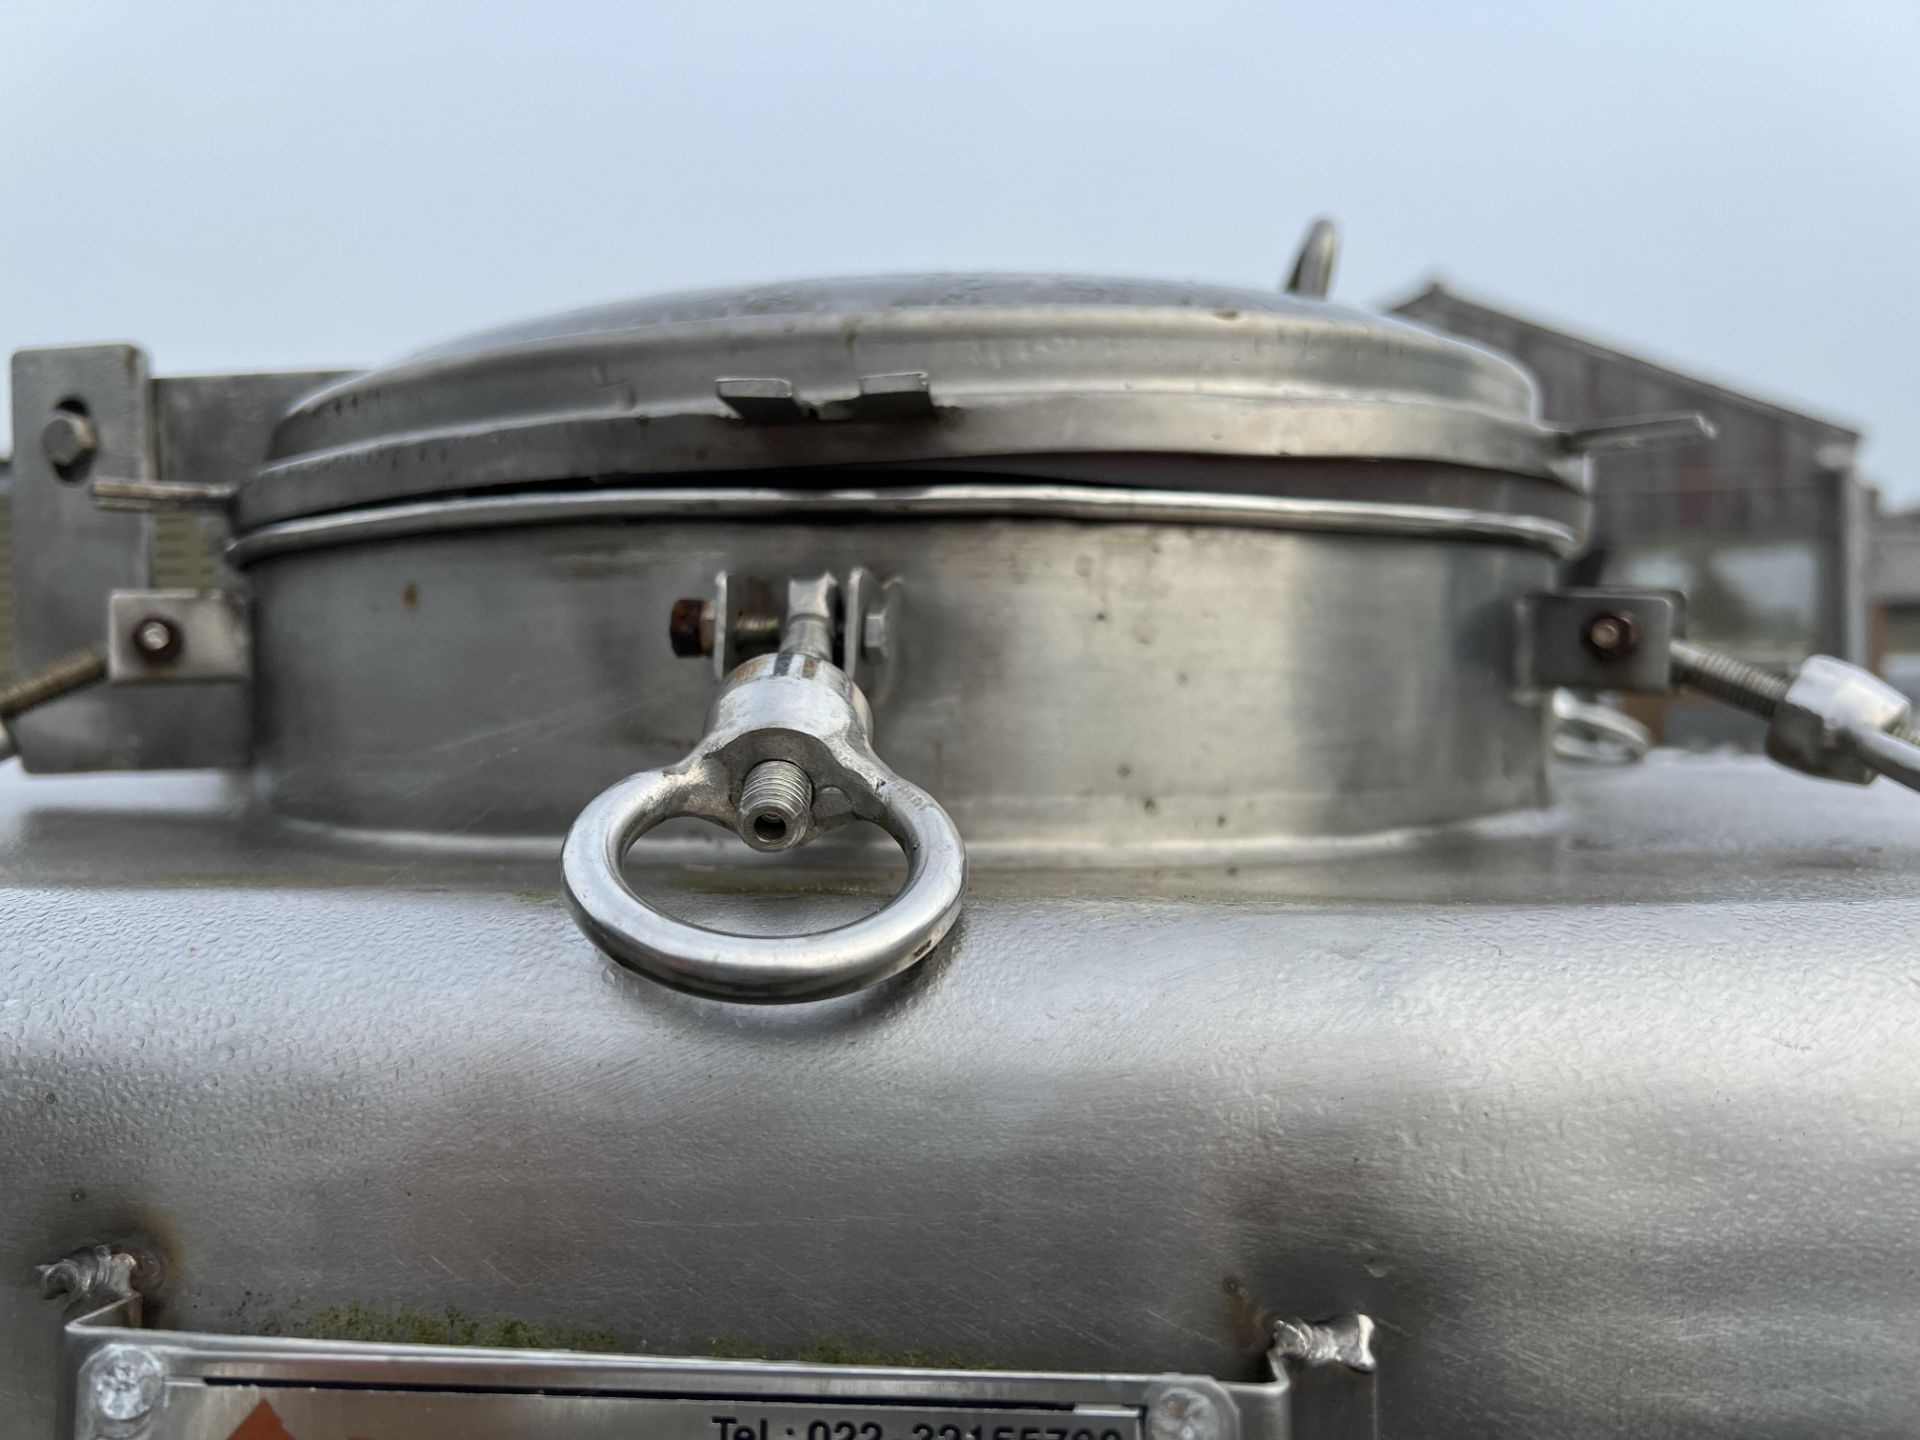 JPE IBC2 KL Fluted Stainless Steel Mobile Tank Lidded, with bottom outlet, approx. 1.5 x 1.4 x 2. - Image 5 of 6